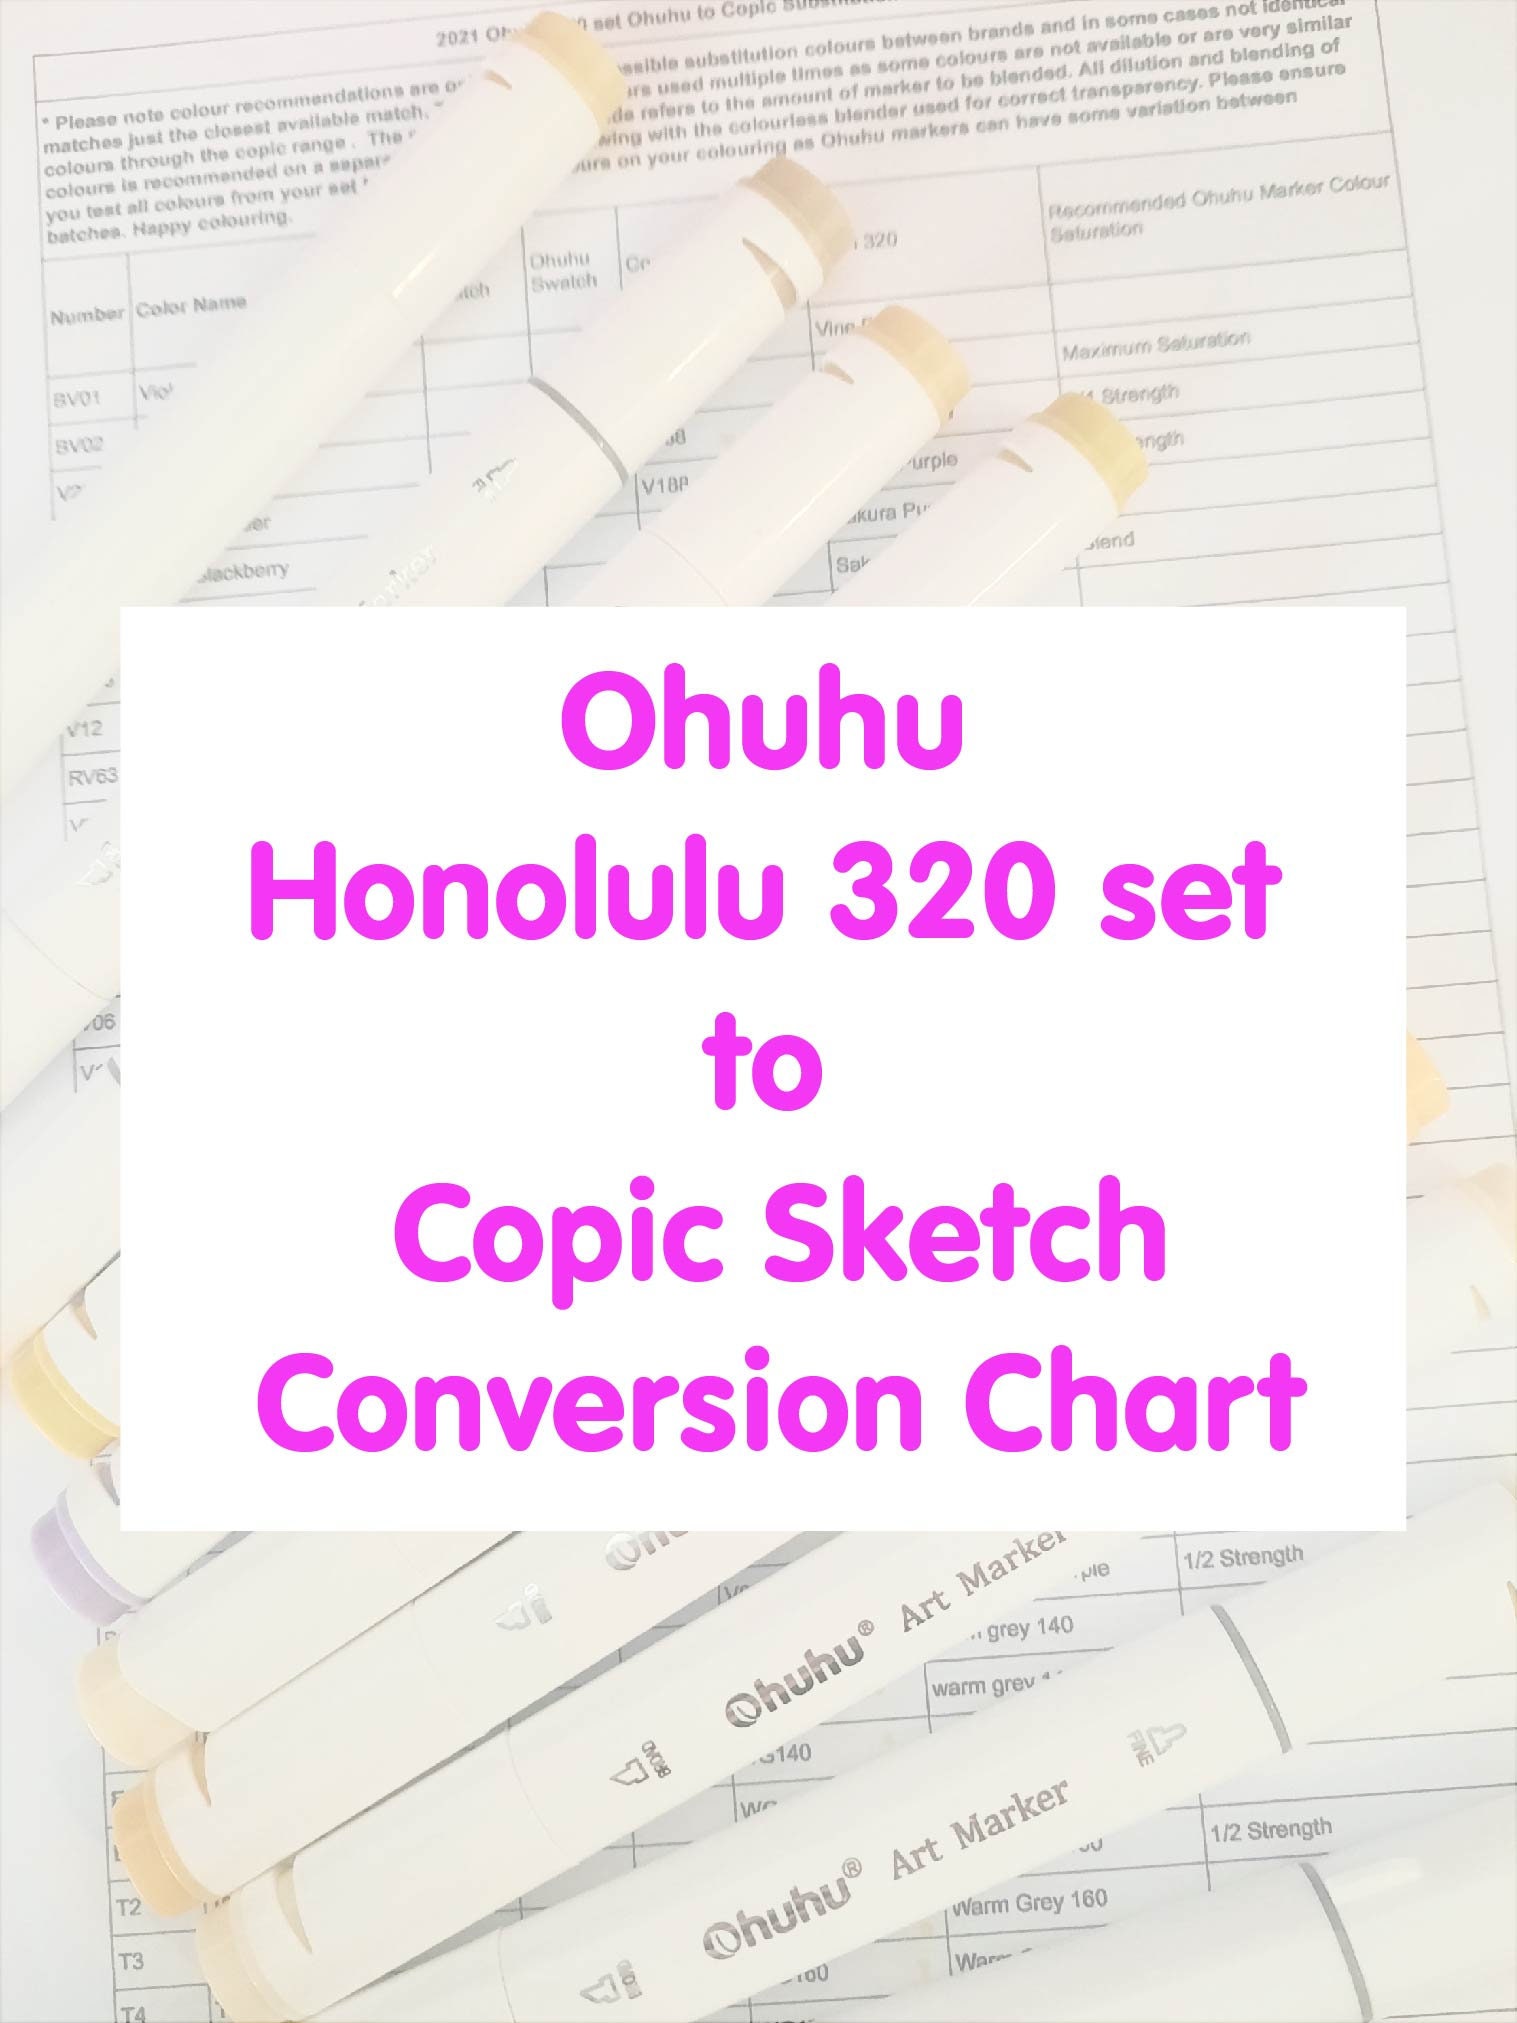 Ohuhu Honolulu COMPLETE 363 Swatch Chart [Includes Large Print Option!] -  Mystic Sparkle Wings's Ko-fi Shop - Ko-fi ❤️ Where creators get support  from fans through donations, memberships, shop sales and more!